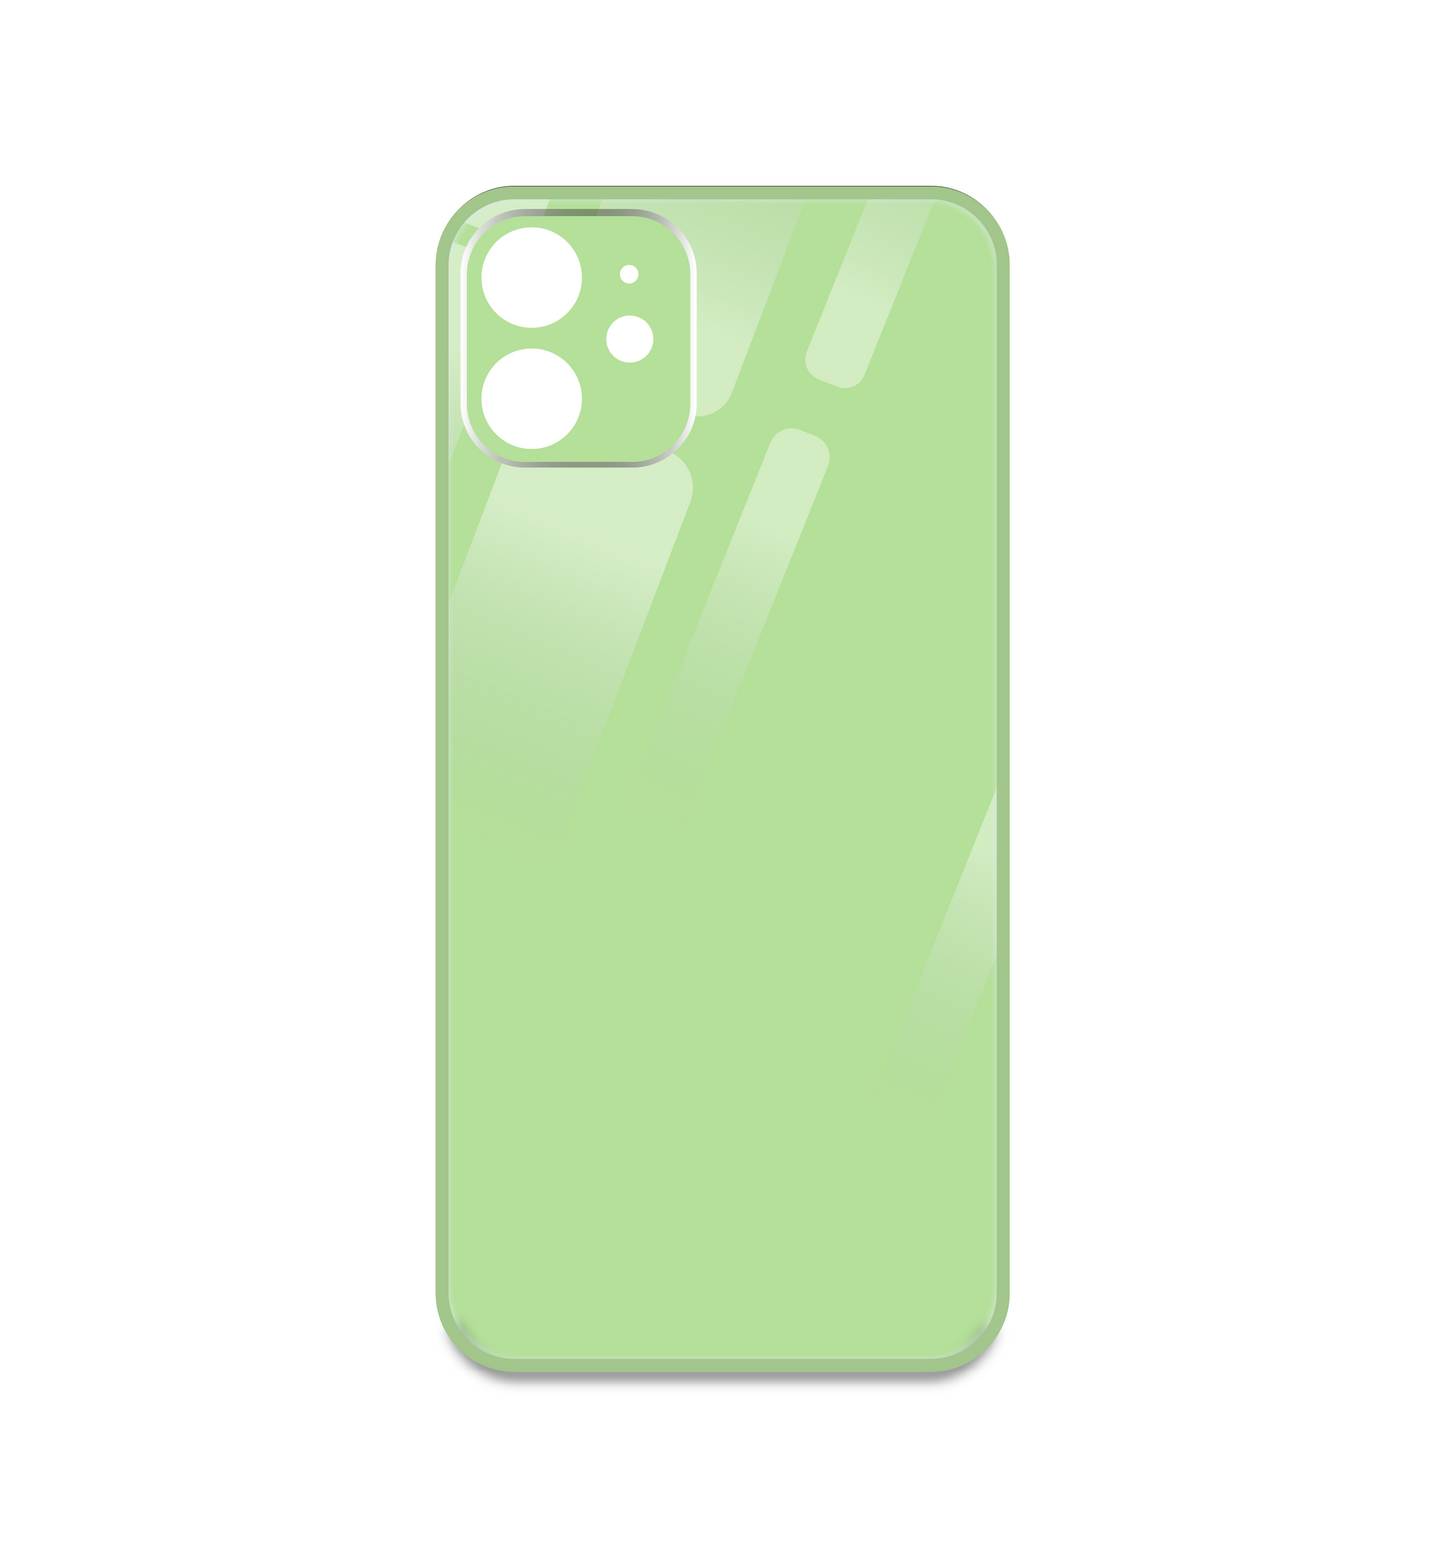 Pastel Green Glass Silicone Case